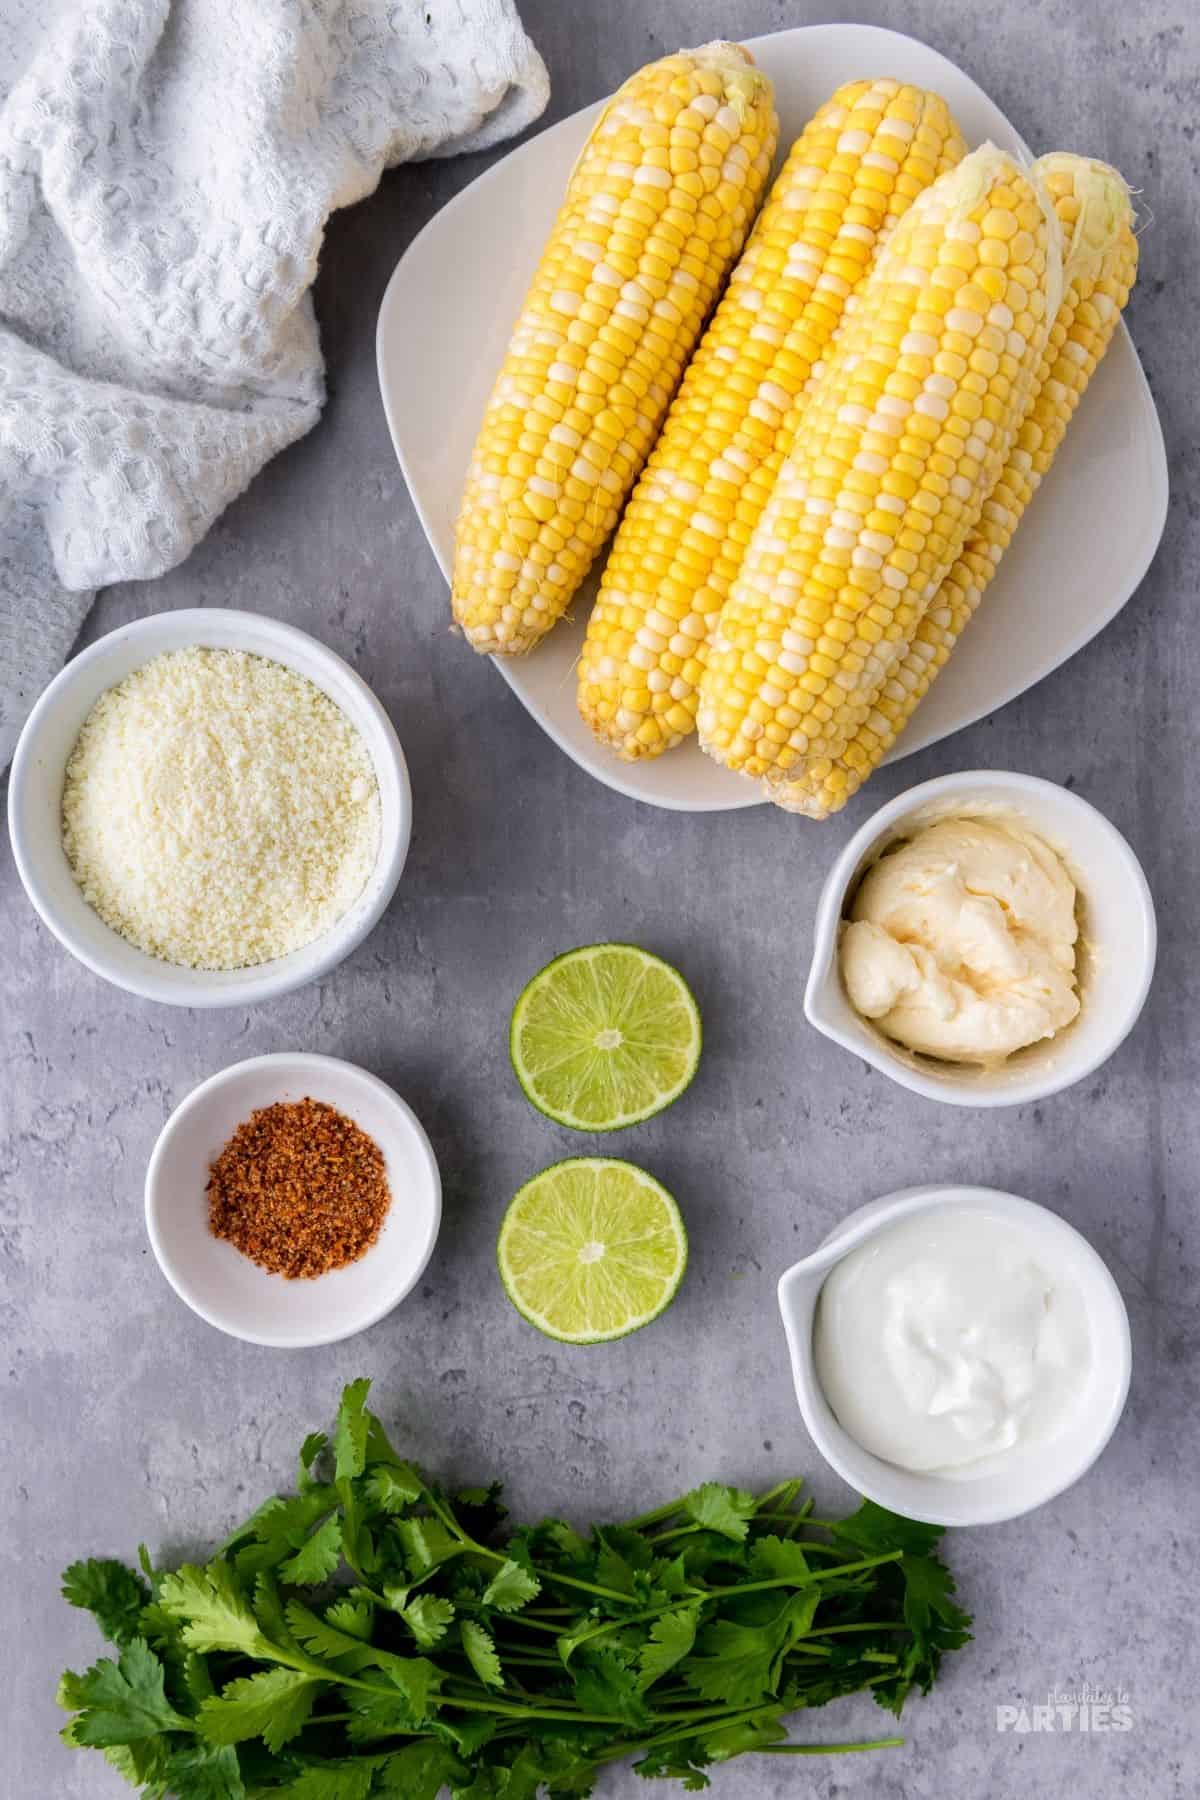 Ingredients for Elotes recipe include corn, Cotija cheese, mexican crema, mayonnaise, Tajin, limes, and cilantro.